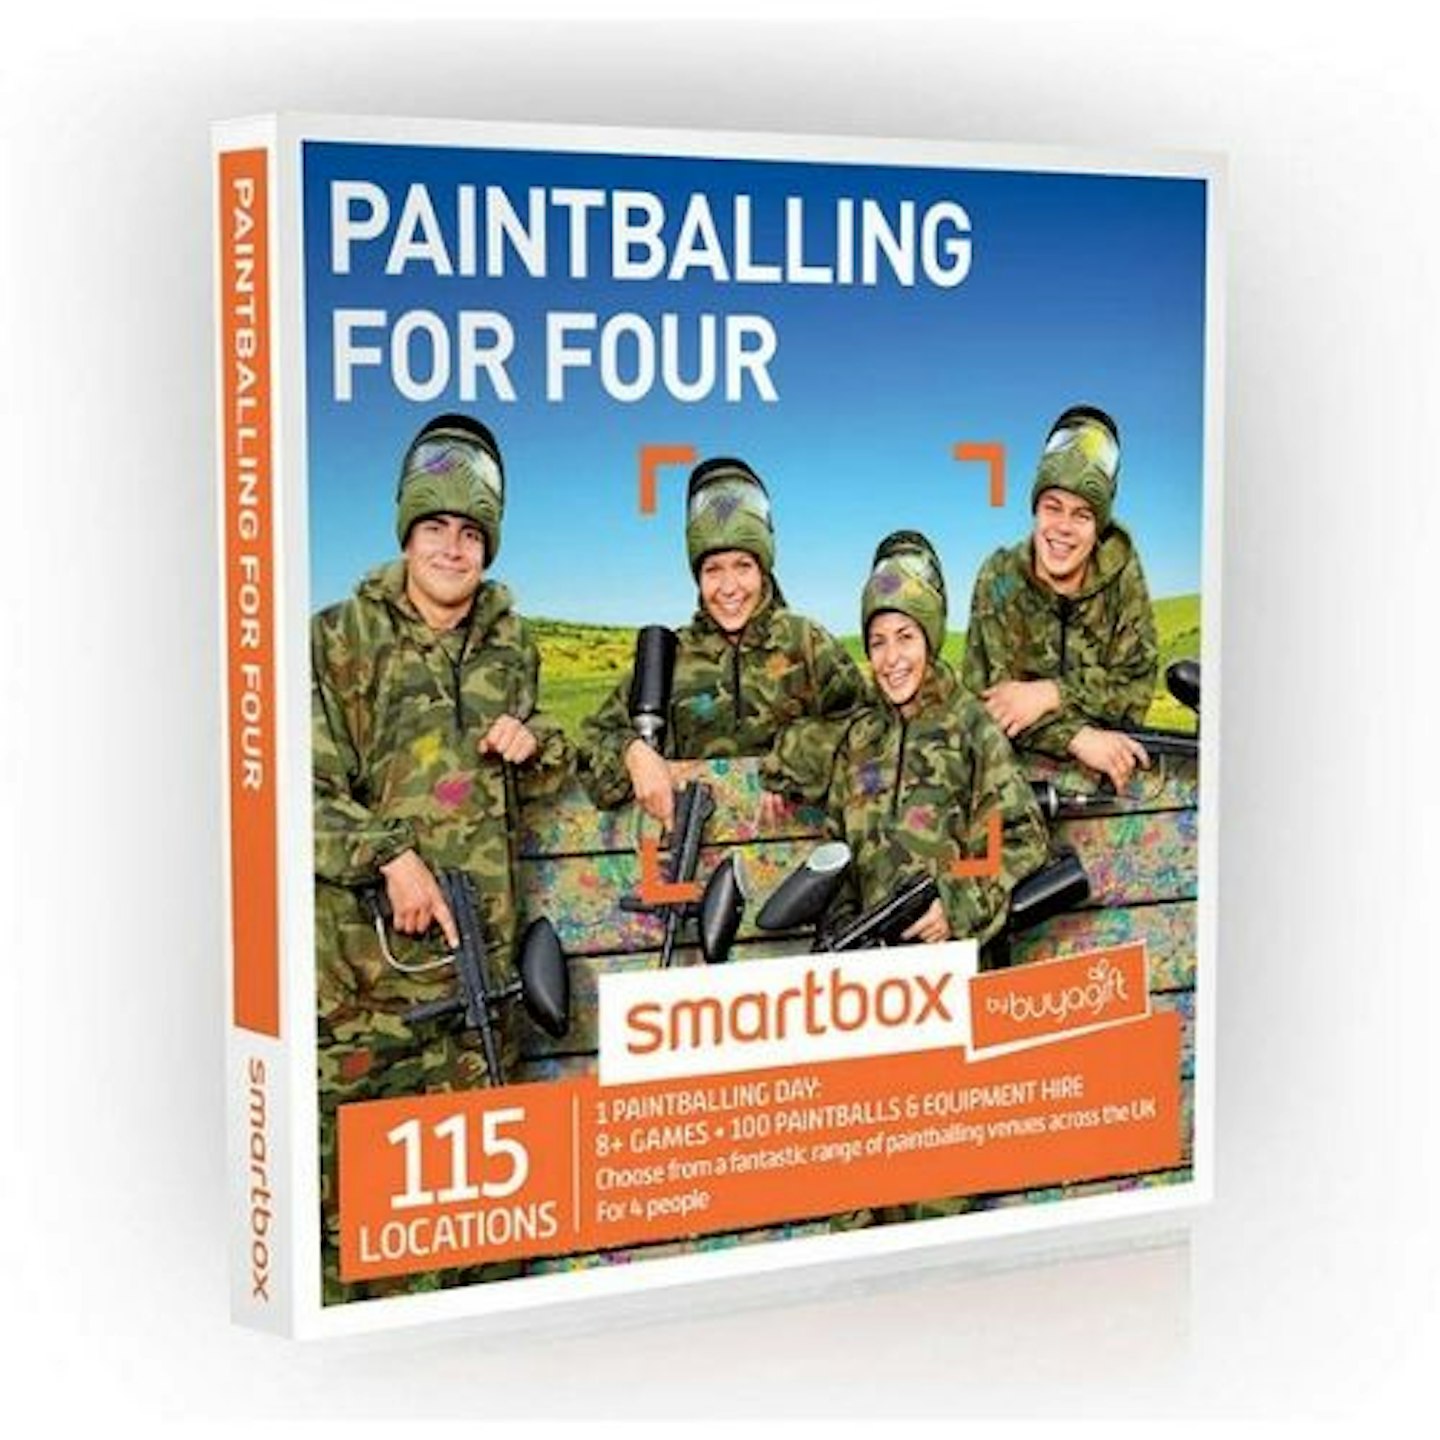 Buyagift Paintballing for Four